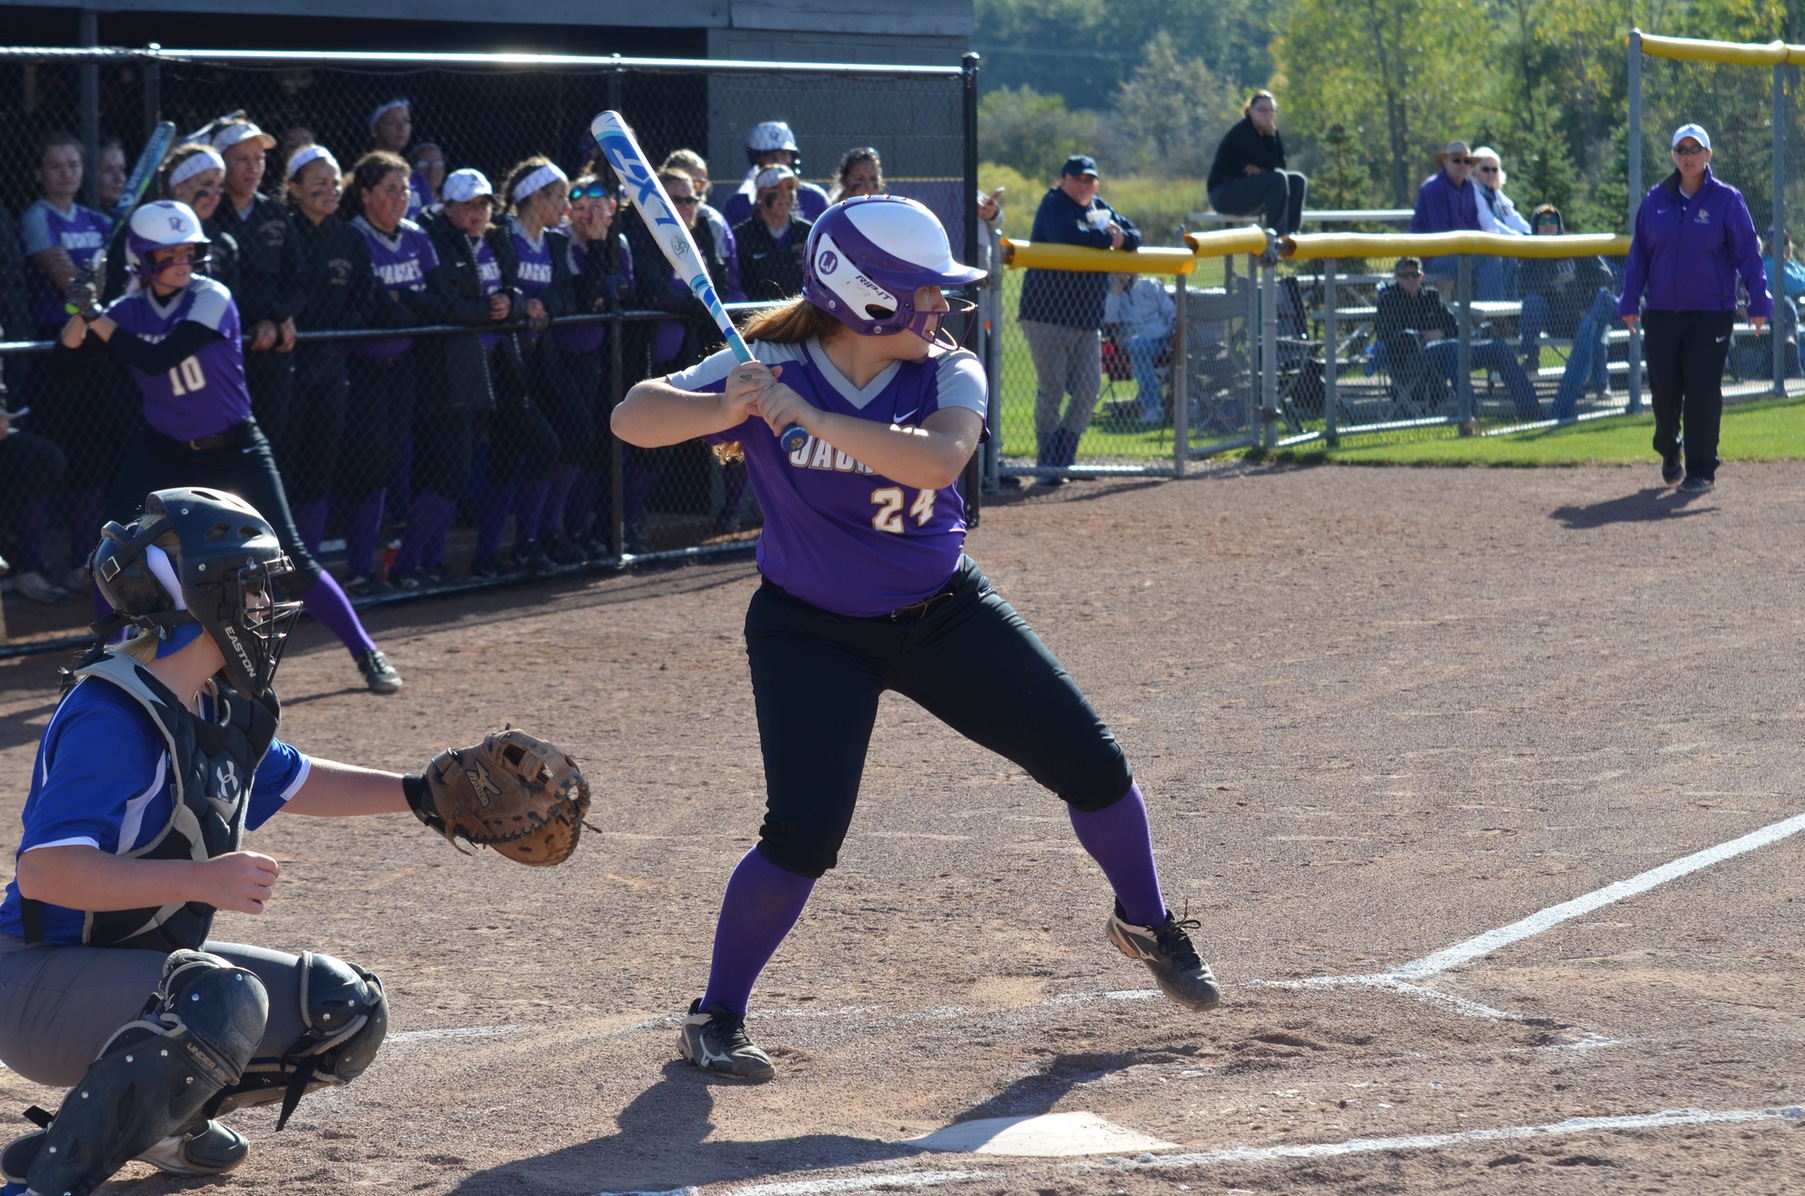 Perry Leads DC in Hanover Sweep, Clinching HCAC Tournament Bid